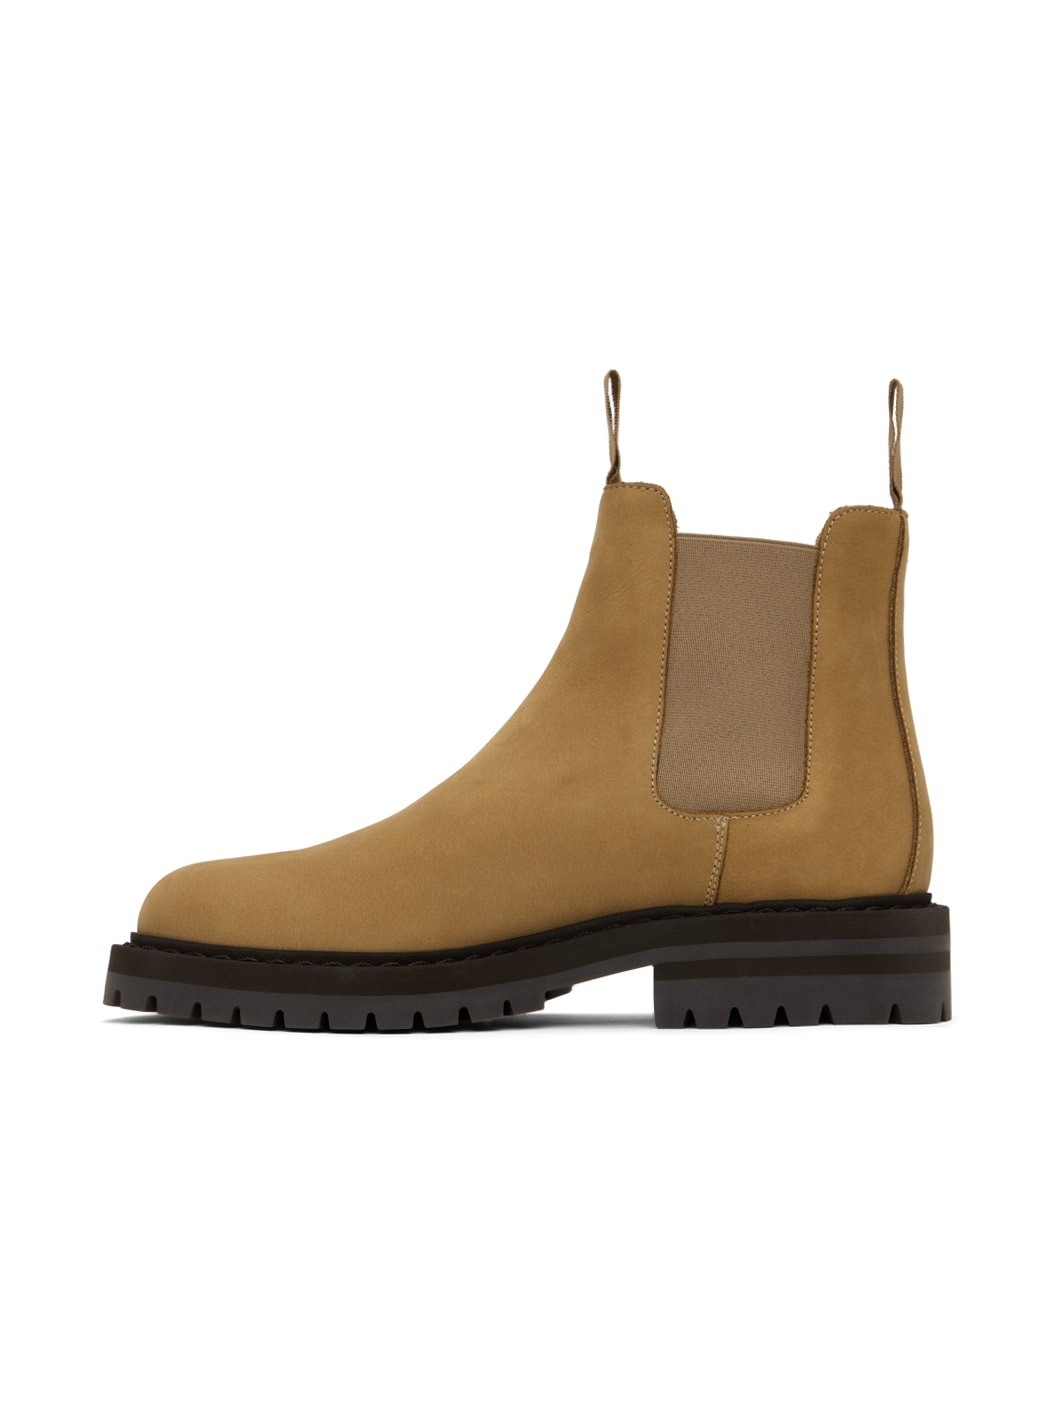 Tan Suede Chelsea Boots - 3